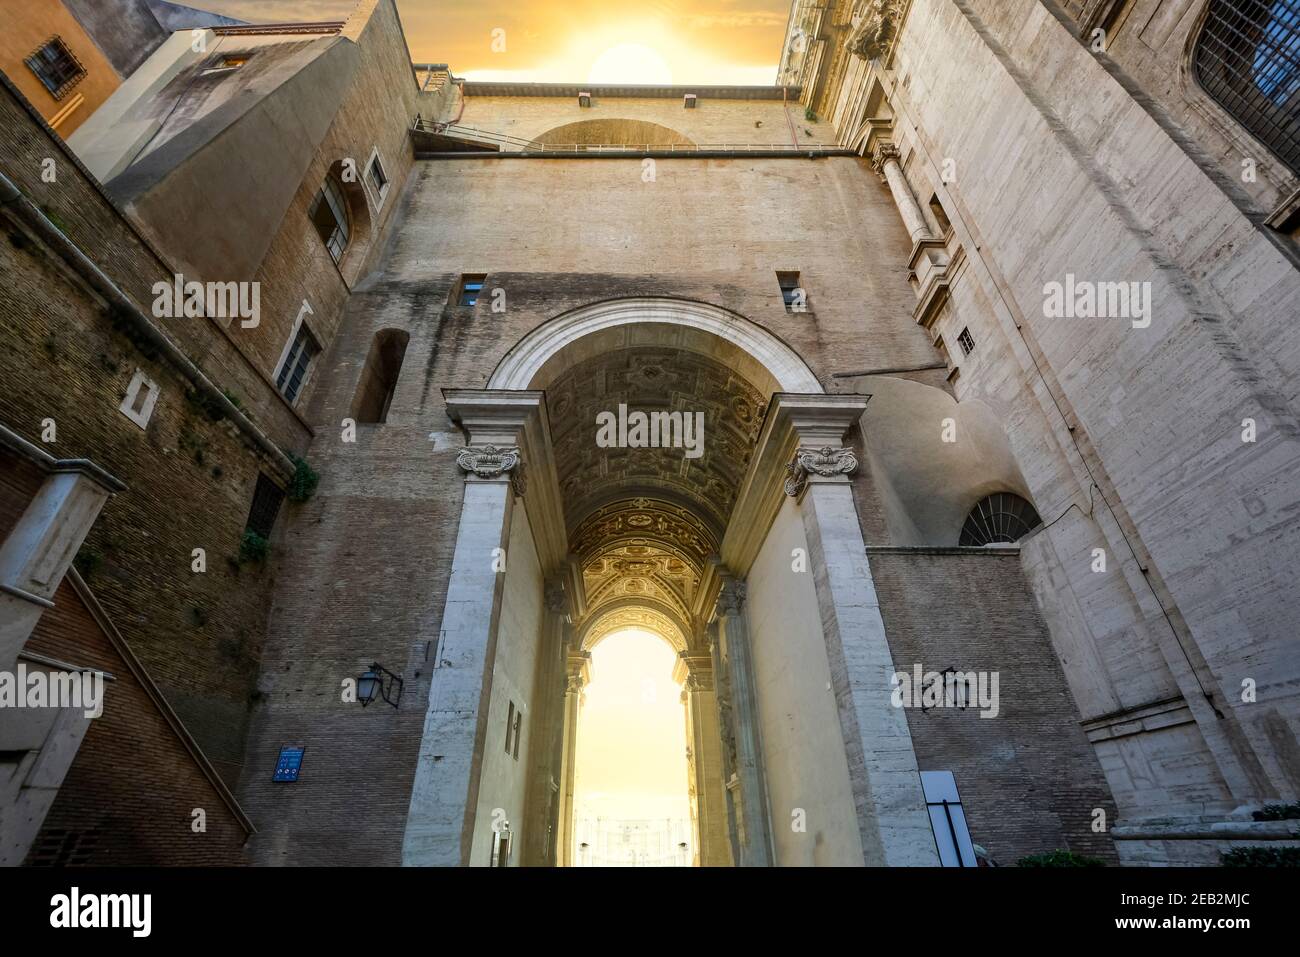 The imposing main gate into the Vatican City museum section inside the Vatican City area of Rome, Italy. Stock Photo